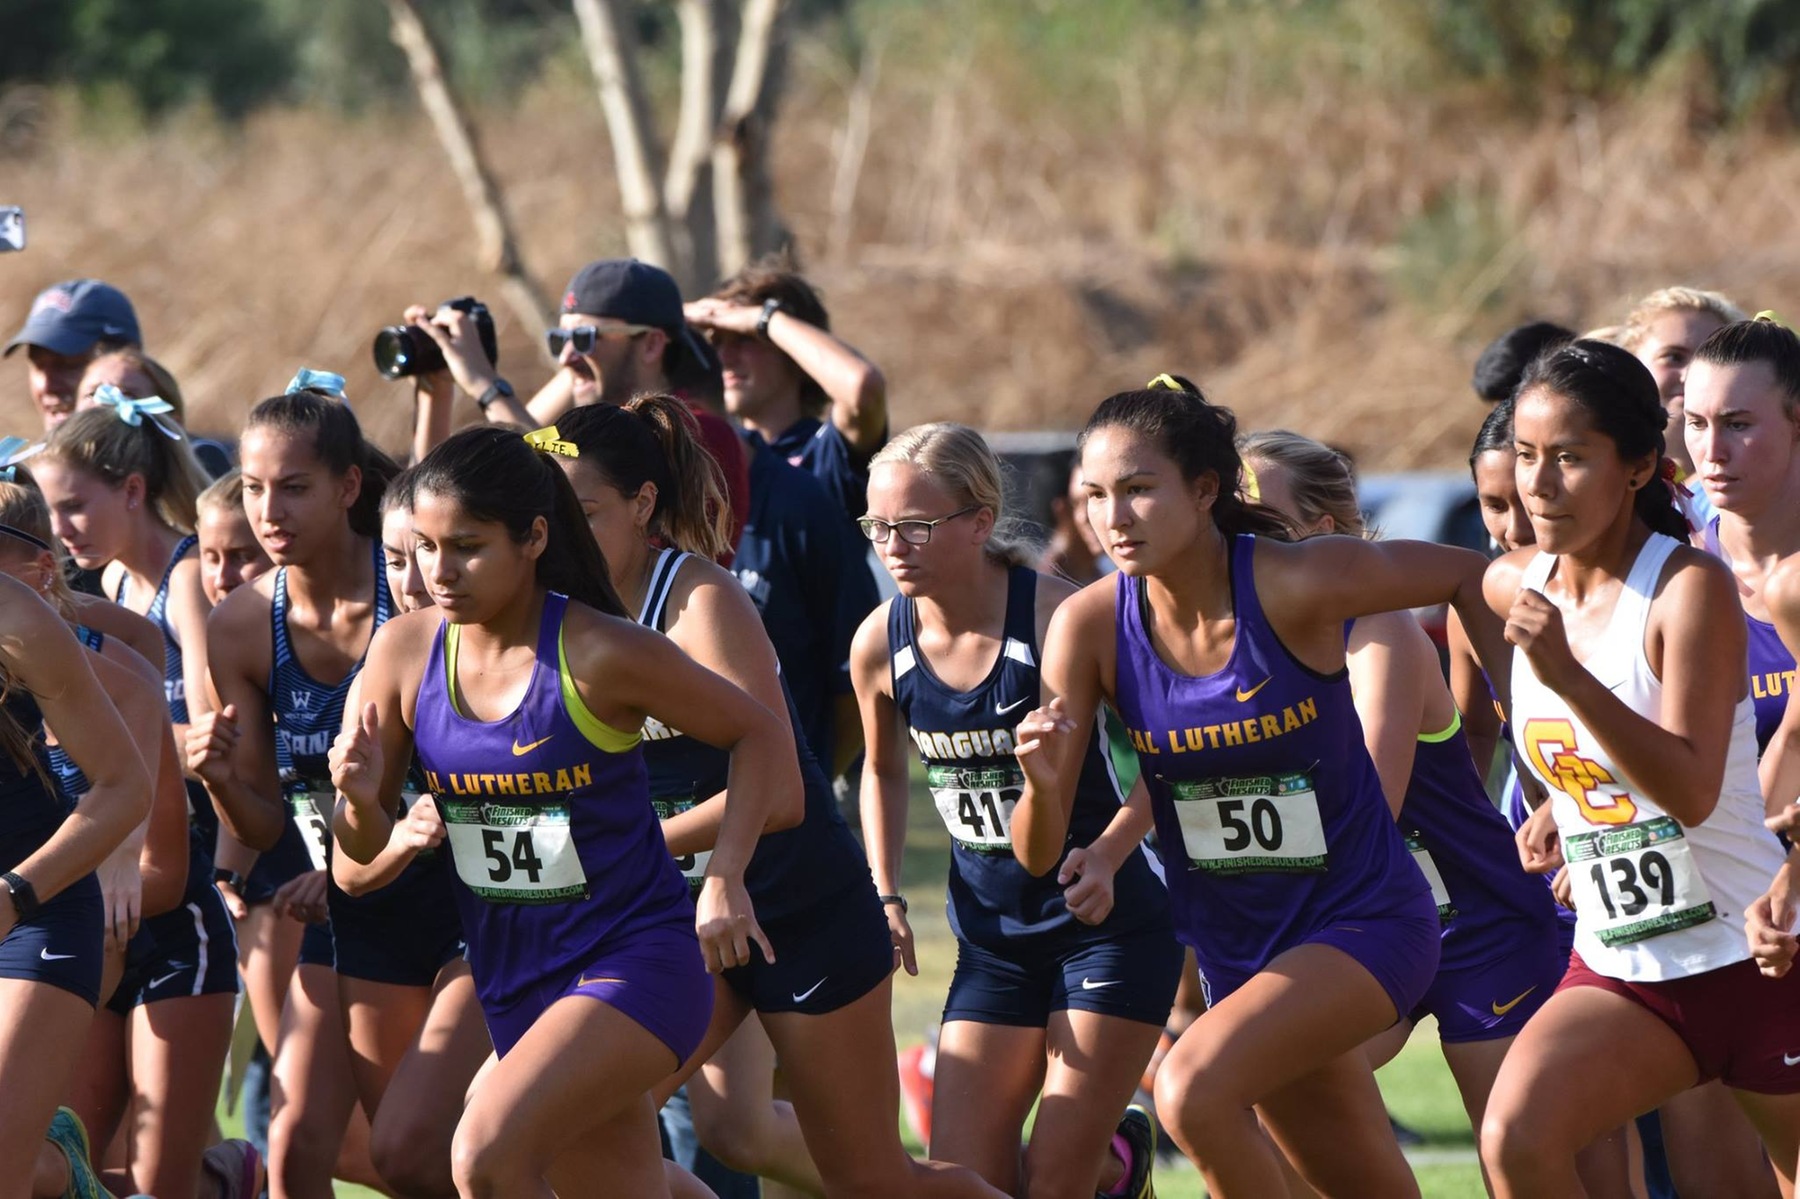 Ereso Paces Regals with CLU Course Record